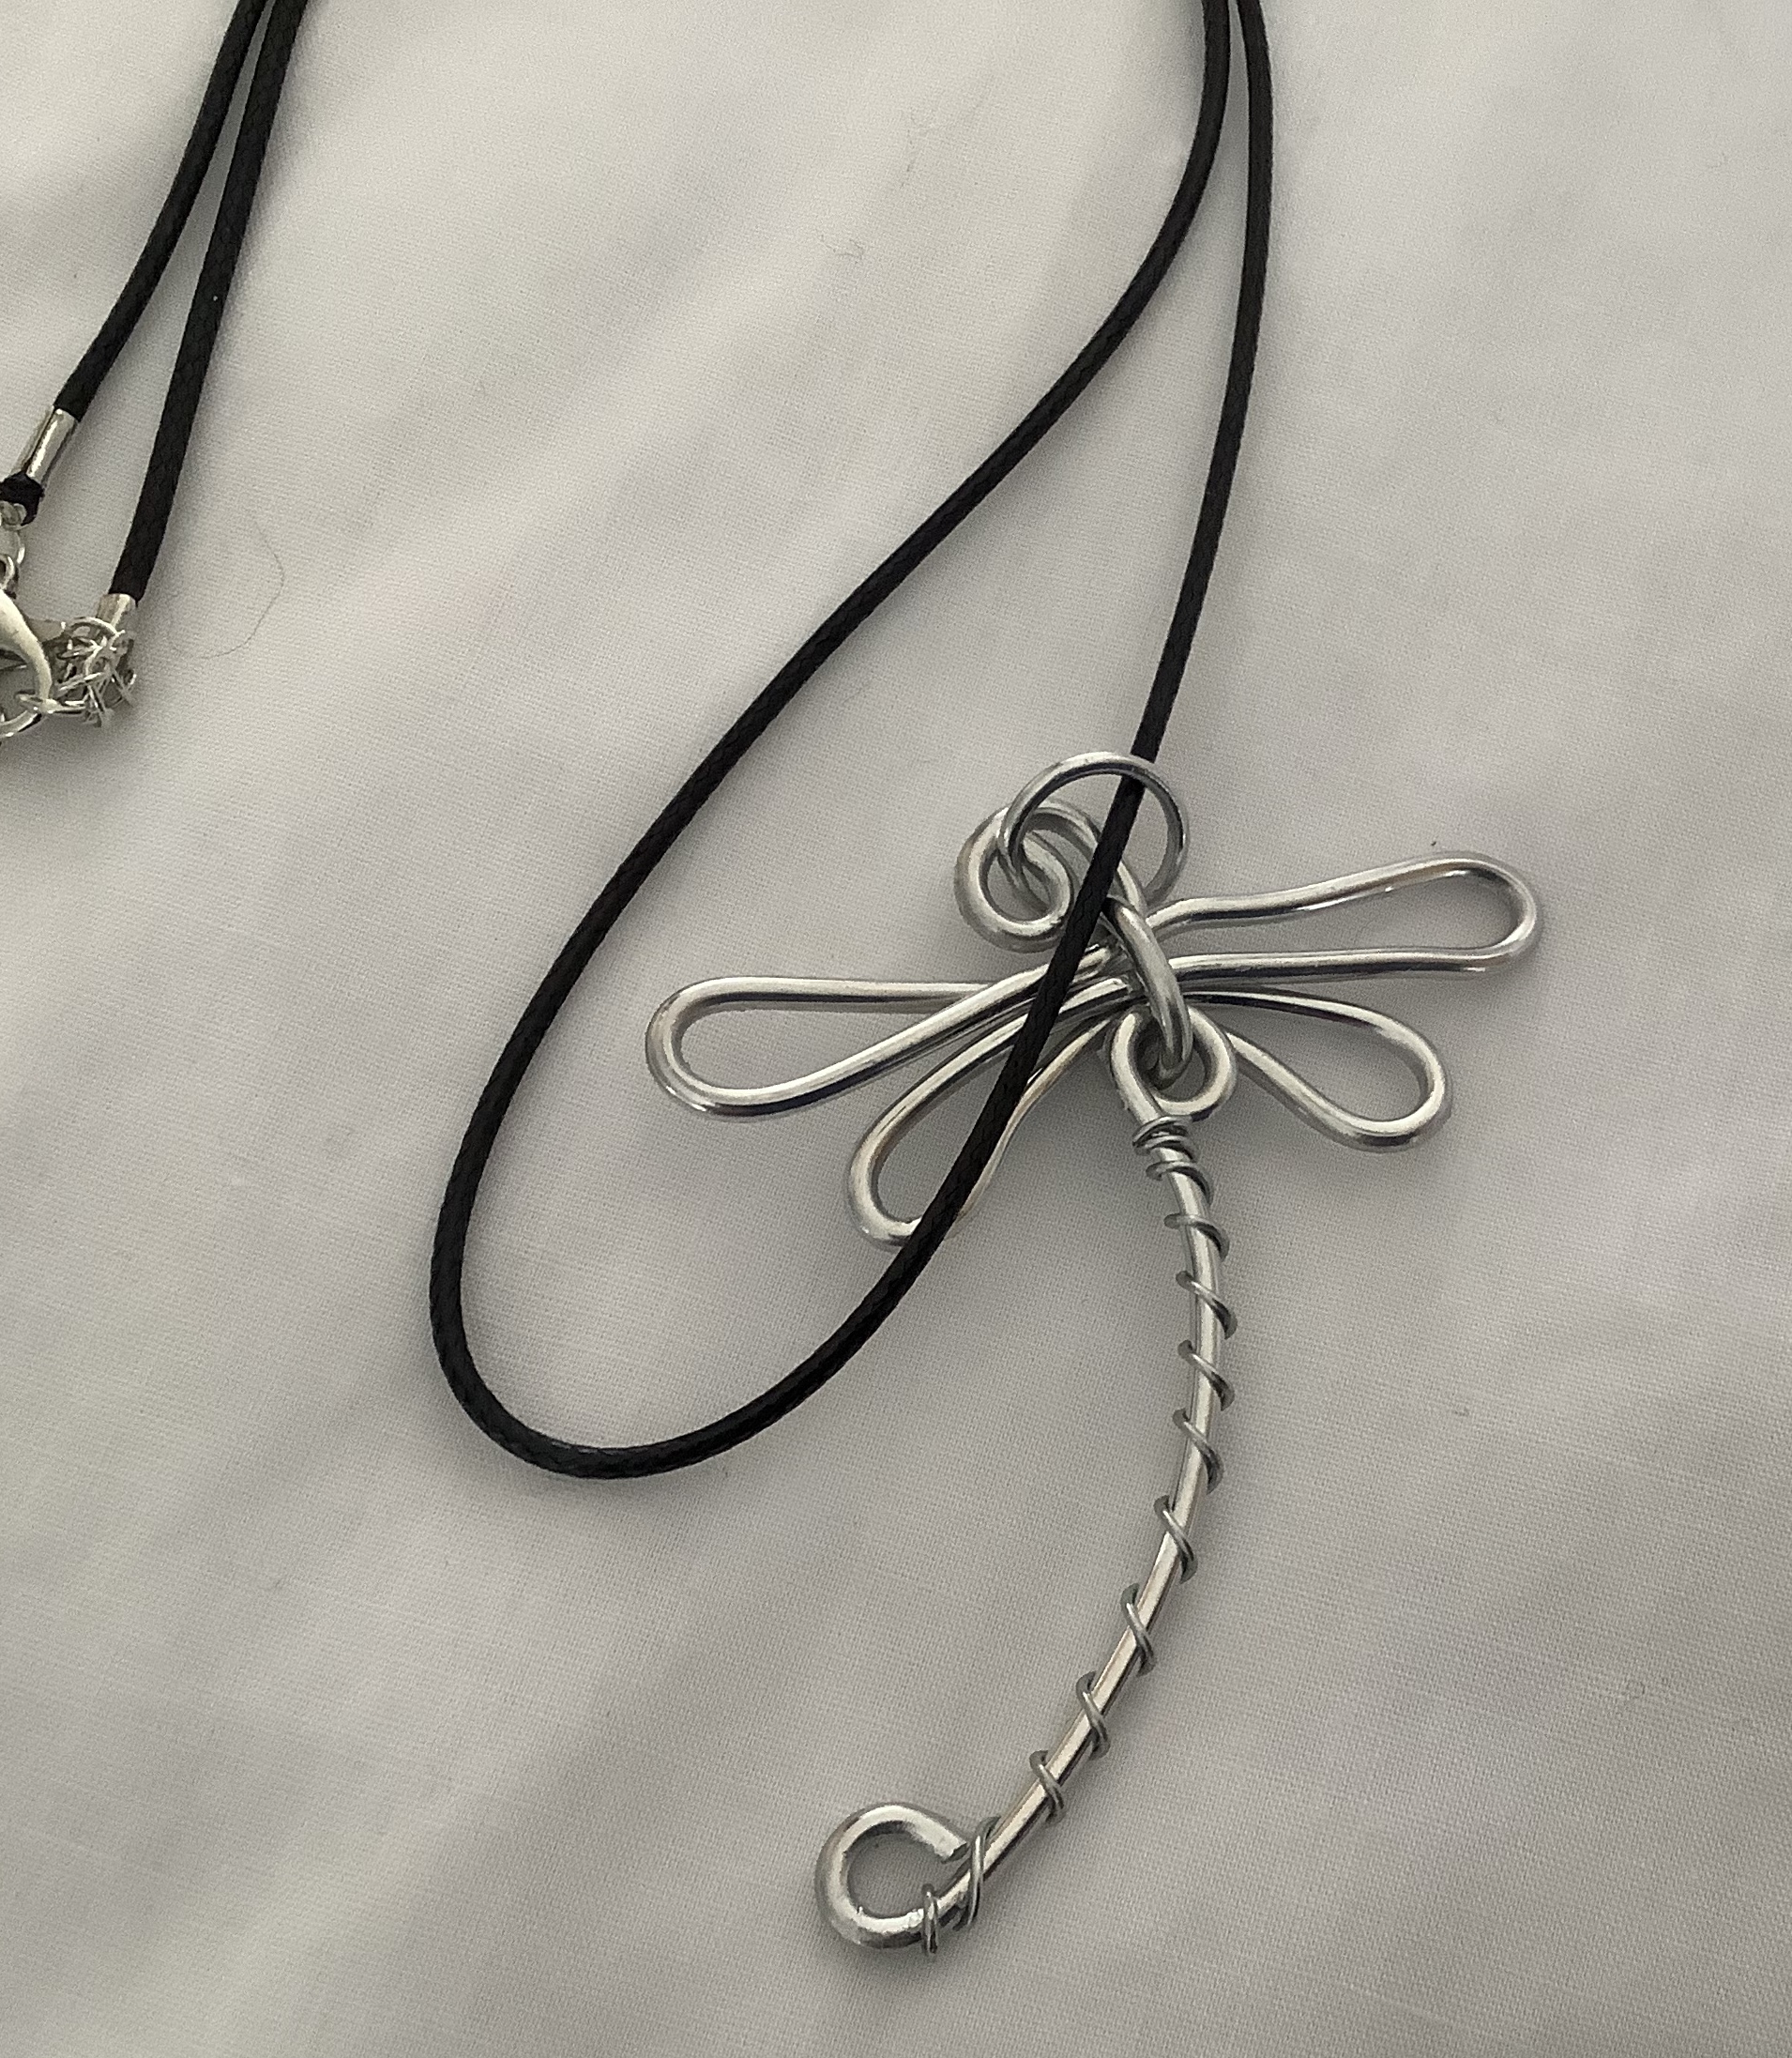 Dragonfly Pendant is hand wired using silver or aluminum wire.  The “Dragonfly” symbolizes change, transformation adaptability and self-realization. If a dragonfly lands on you it is a sign of good luck.  Price $30.00